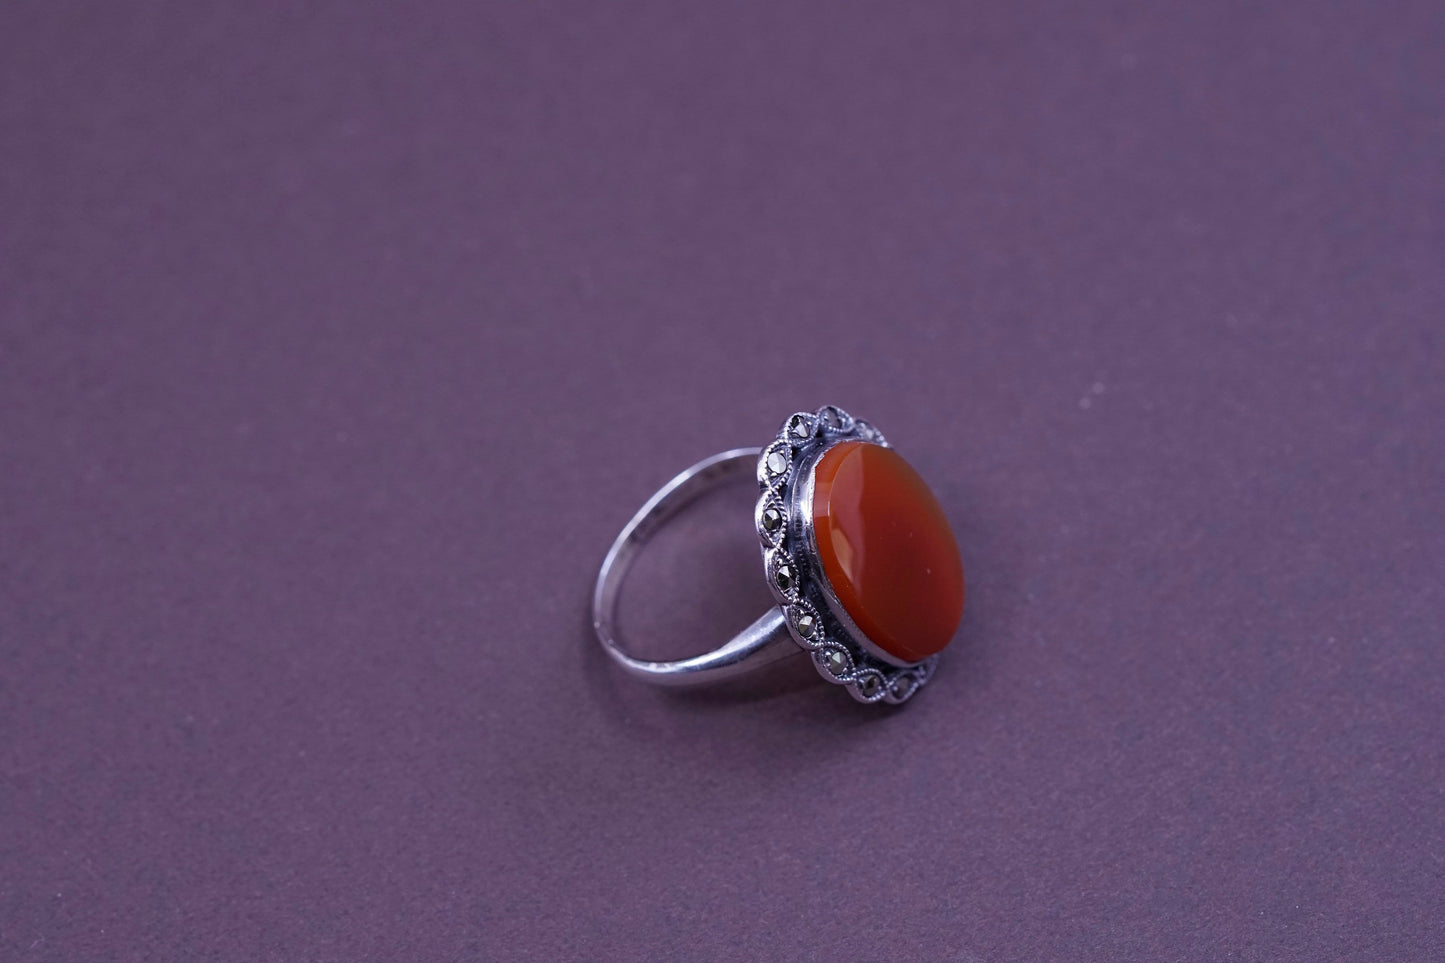 Size 9, vtg Sterling silver handmade flower ring with carnelian and Marcasite